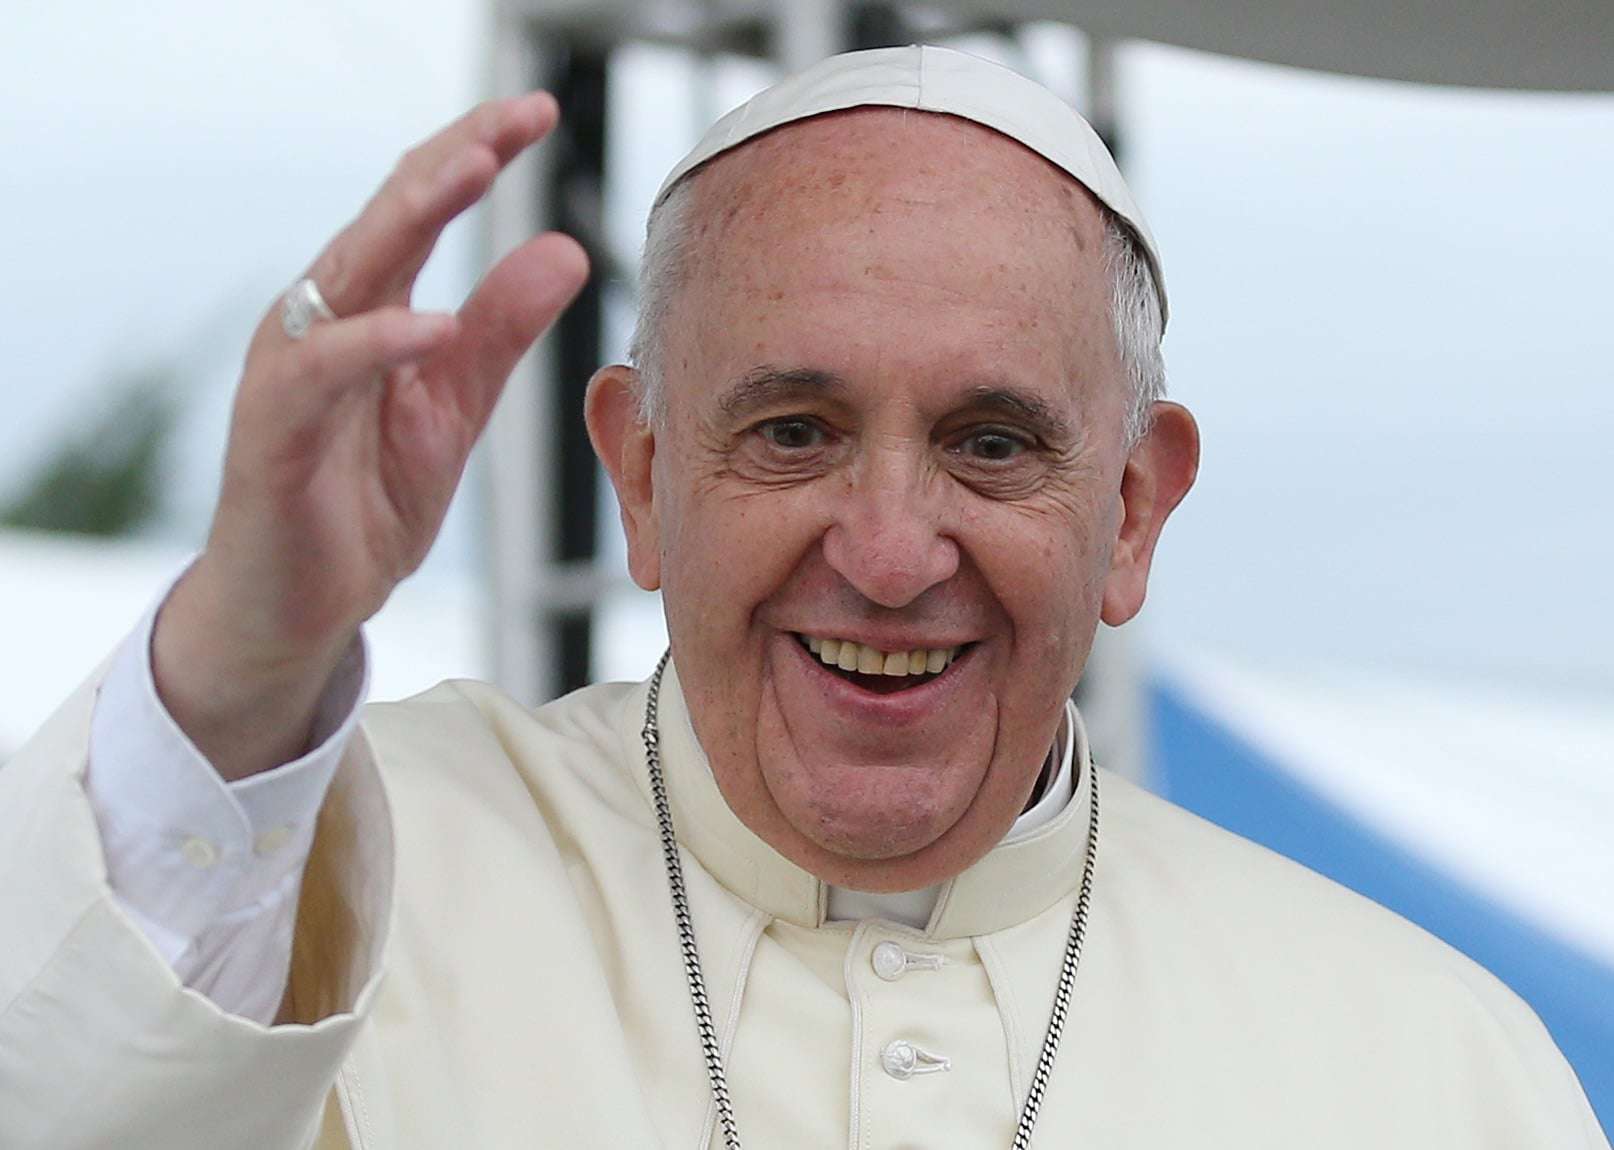 Pope Francis has called Christians to take up their specific roles for the common good